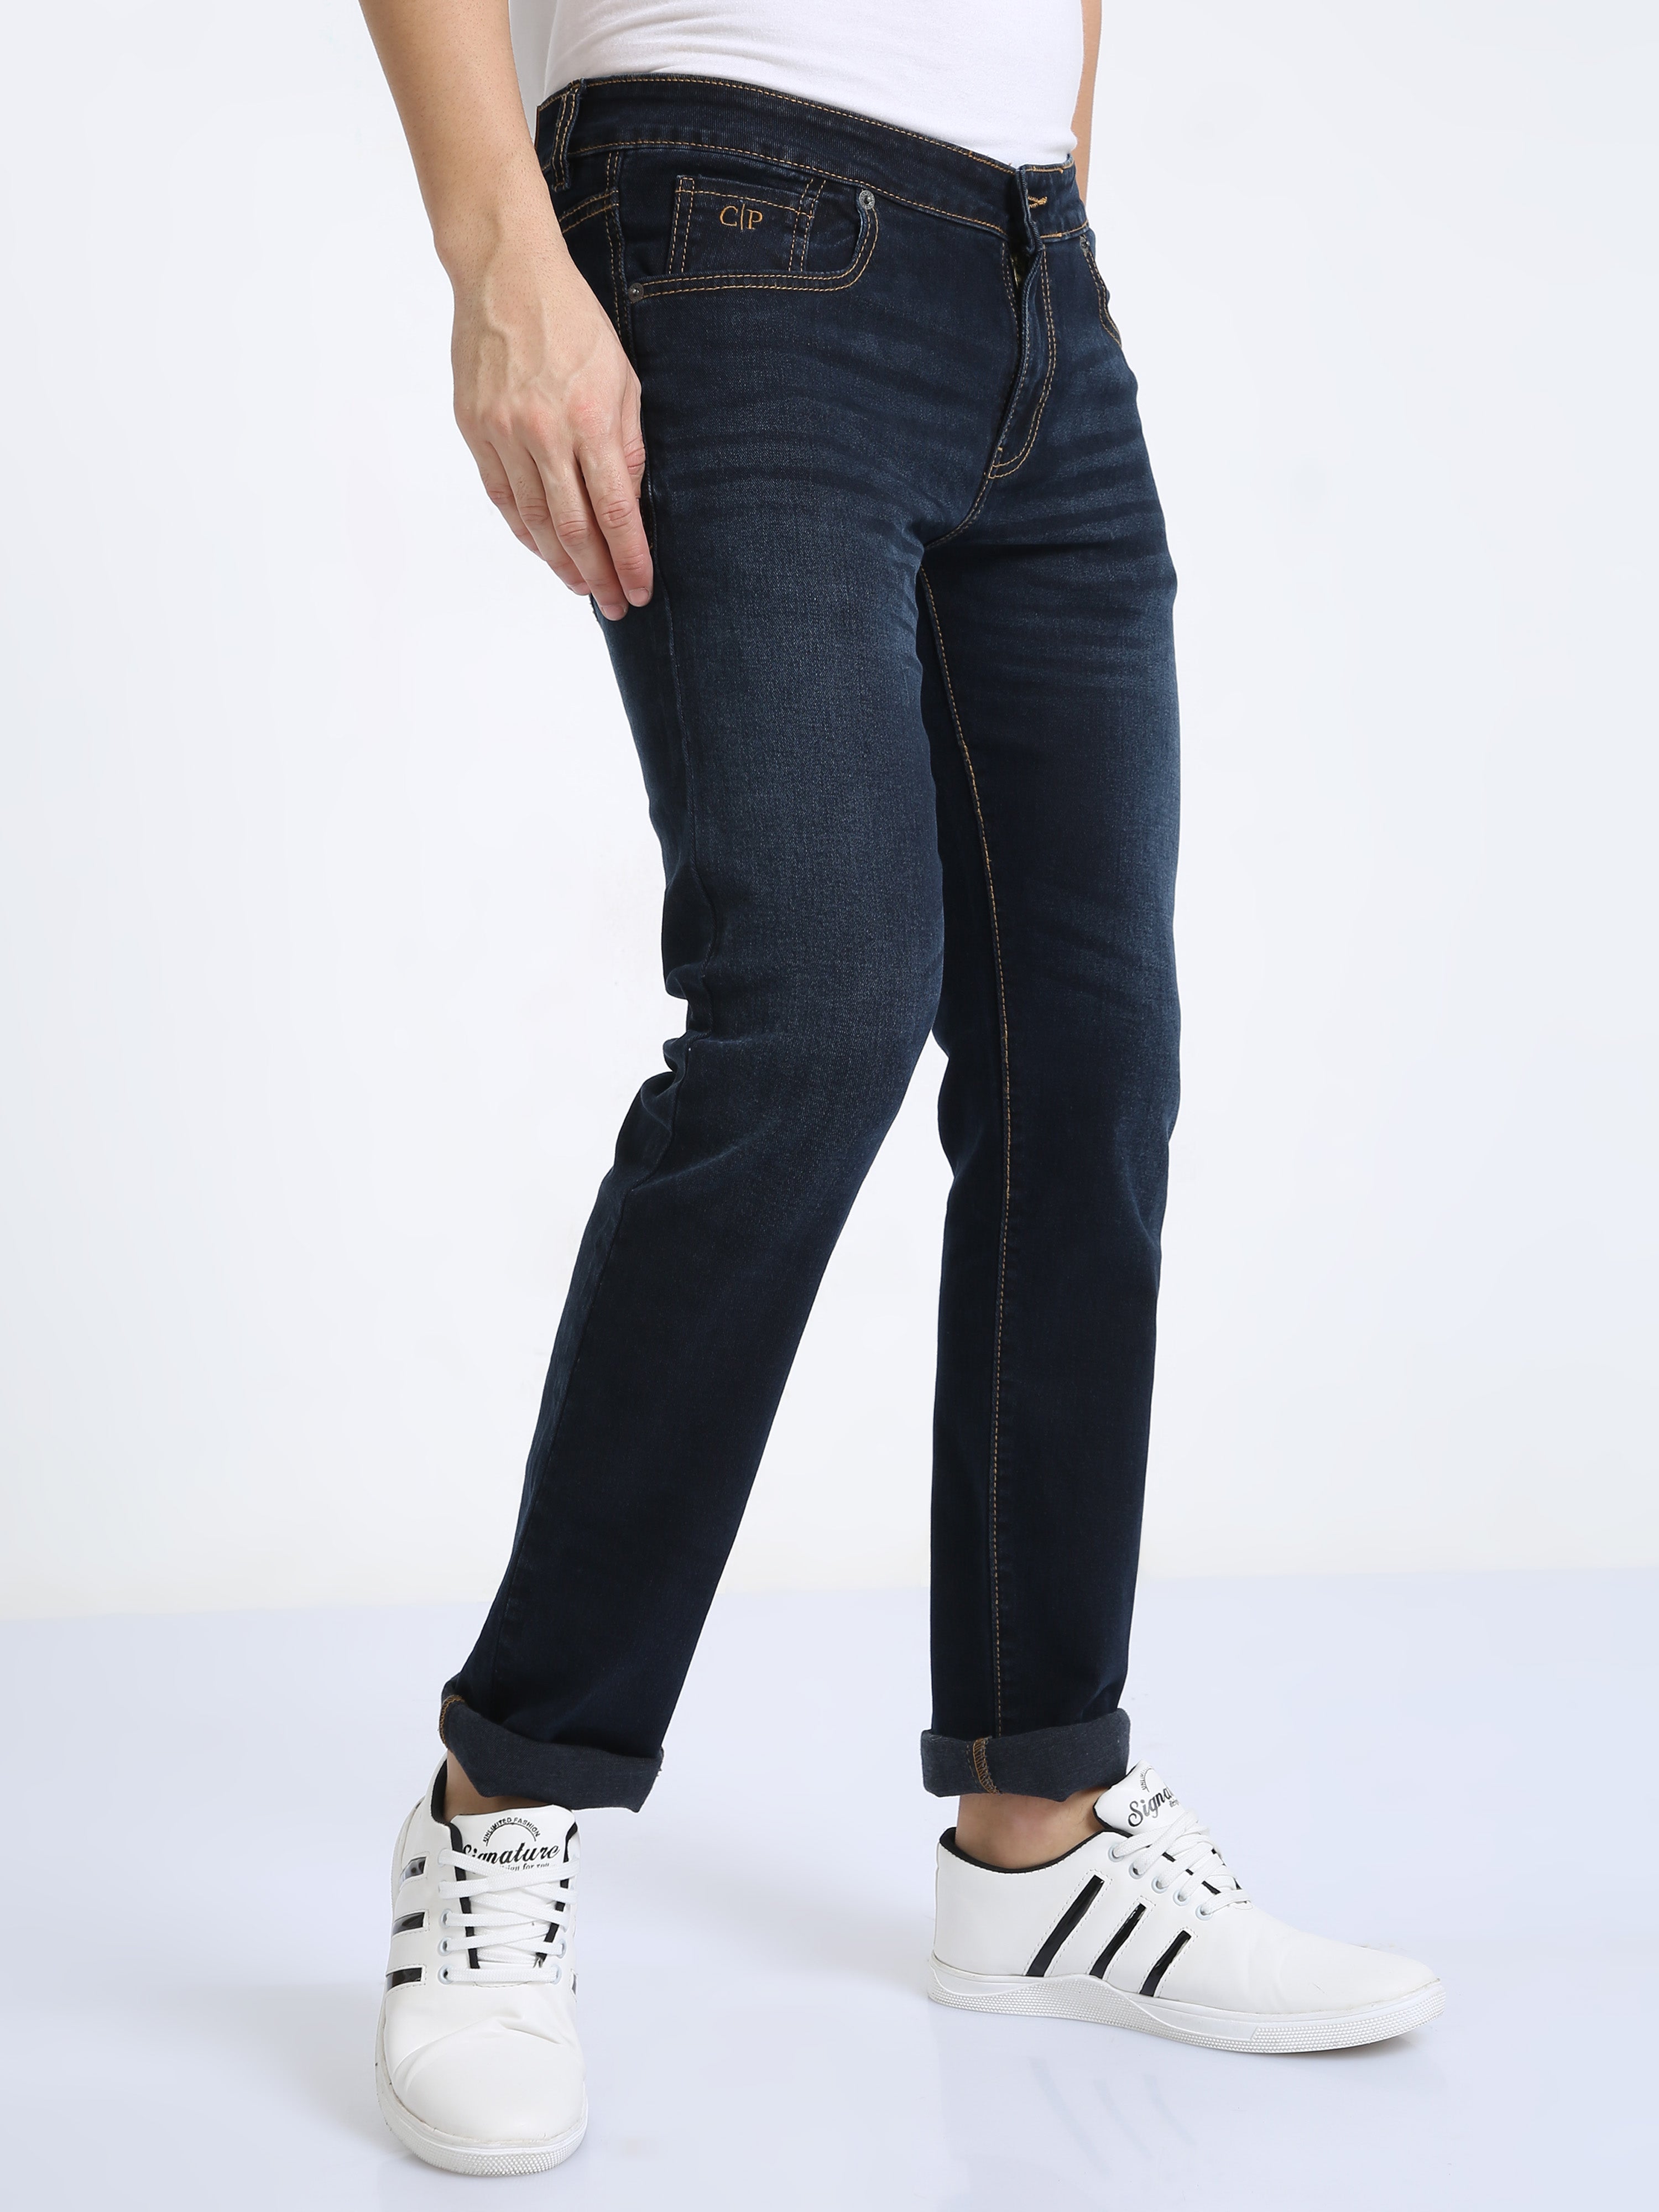 Classic Polo Men's Slim Fit Cotton Denim | CPDO2-23 DNVY-SF-LY